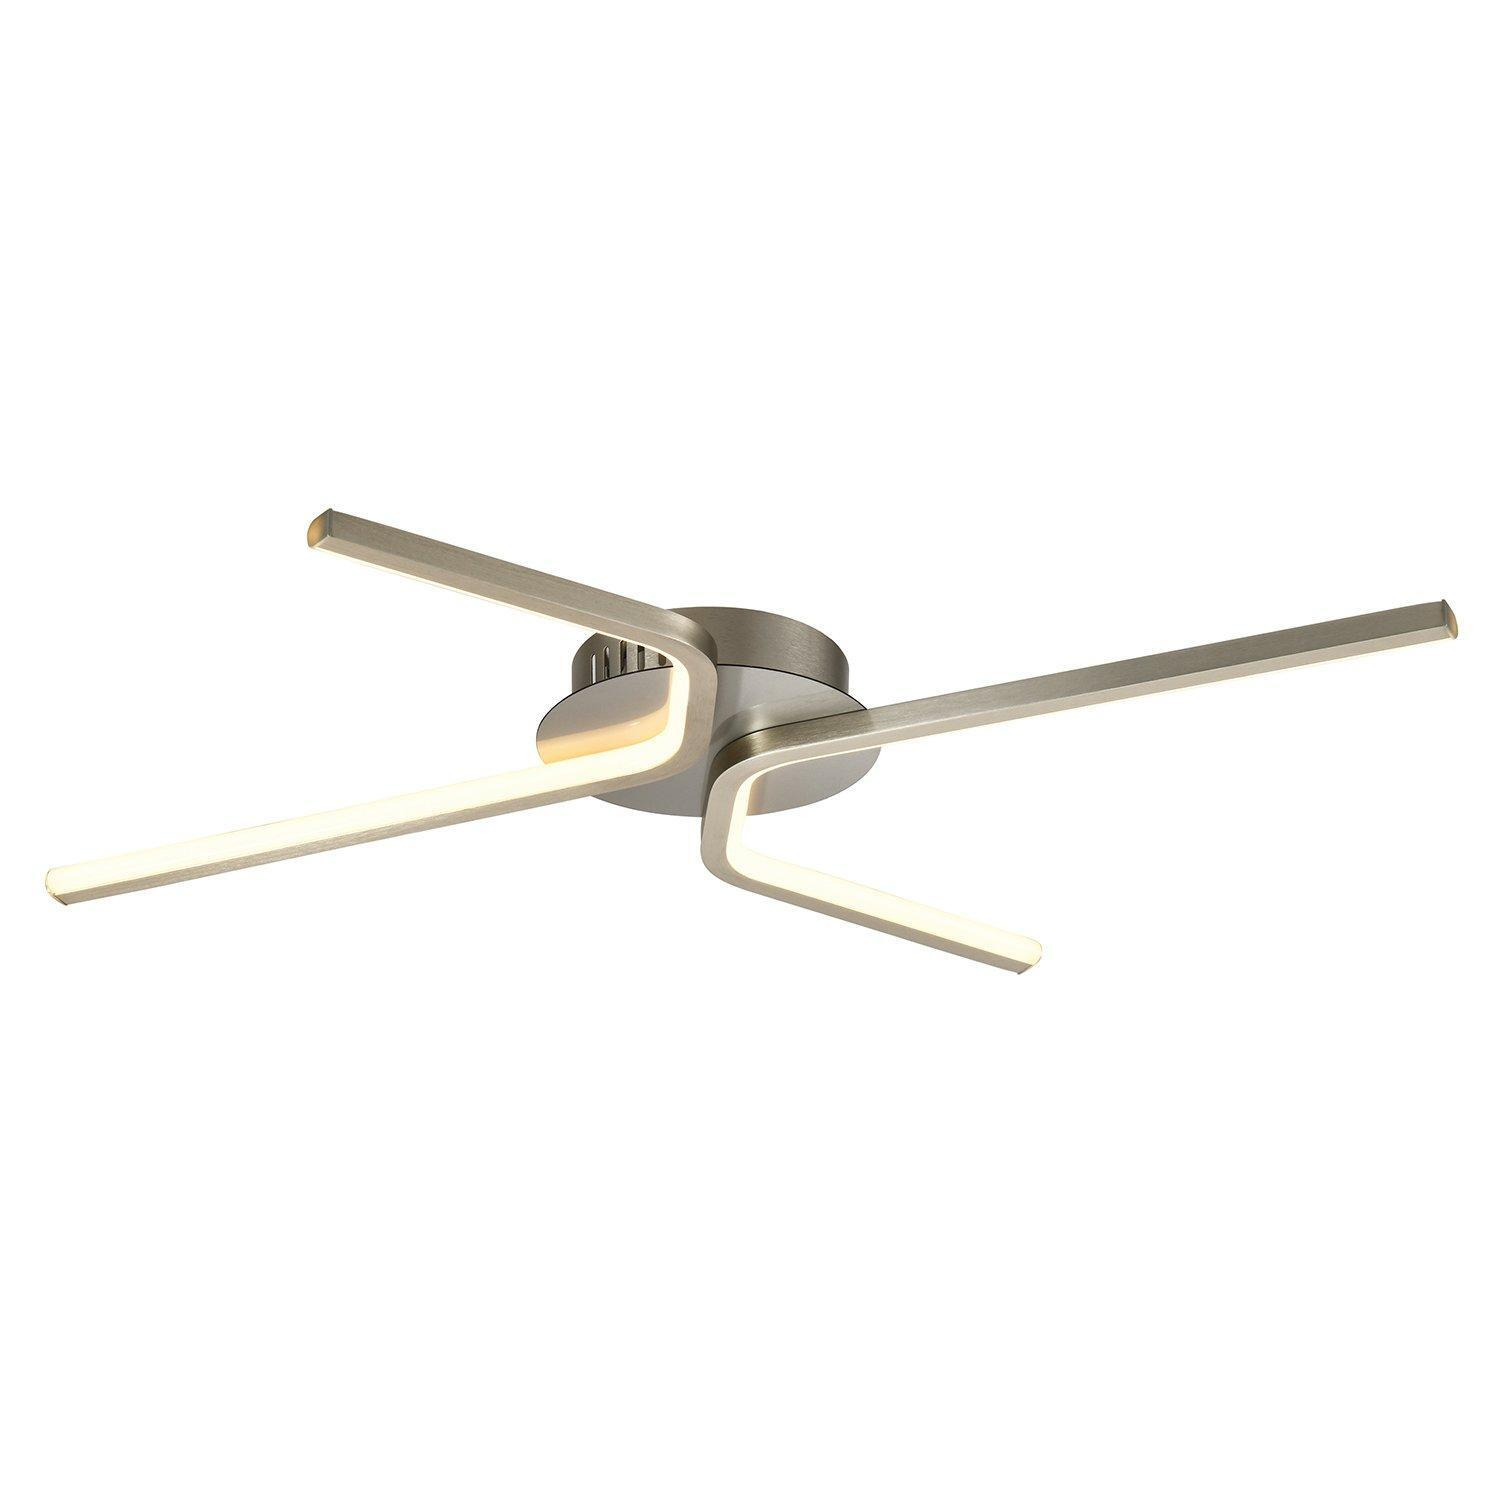 Modern LED Flush Ceiling Light Fitting in Sleek Satin Nickel with C-Shaped Arms - image 1